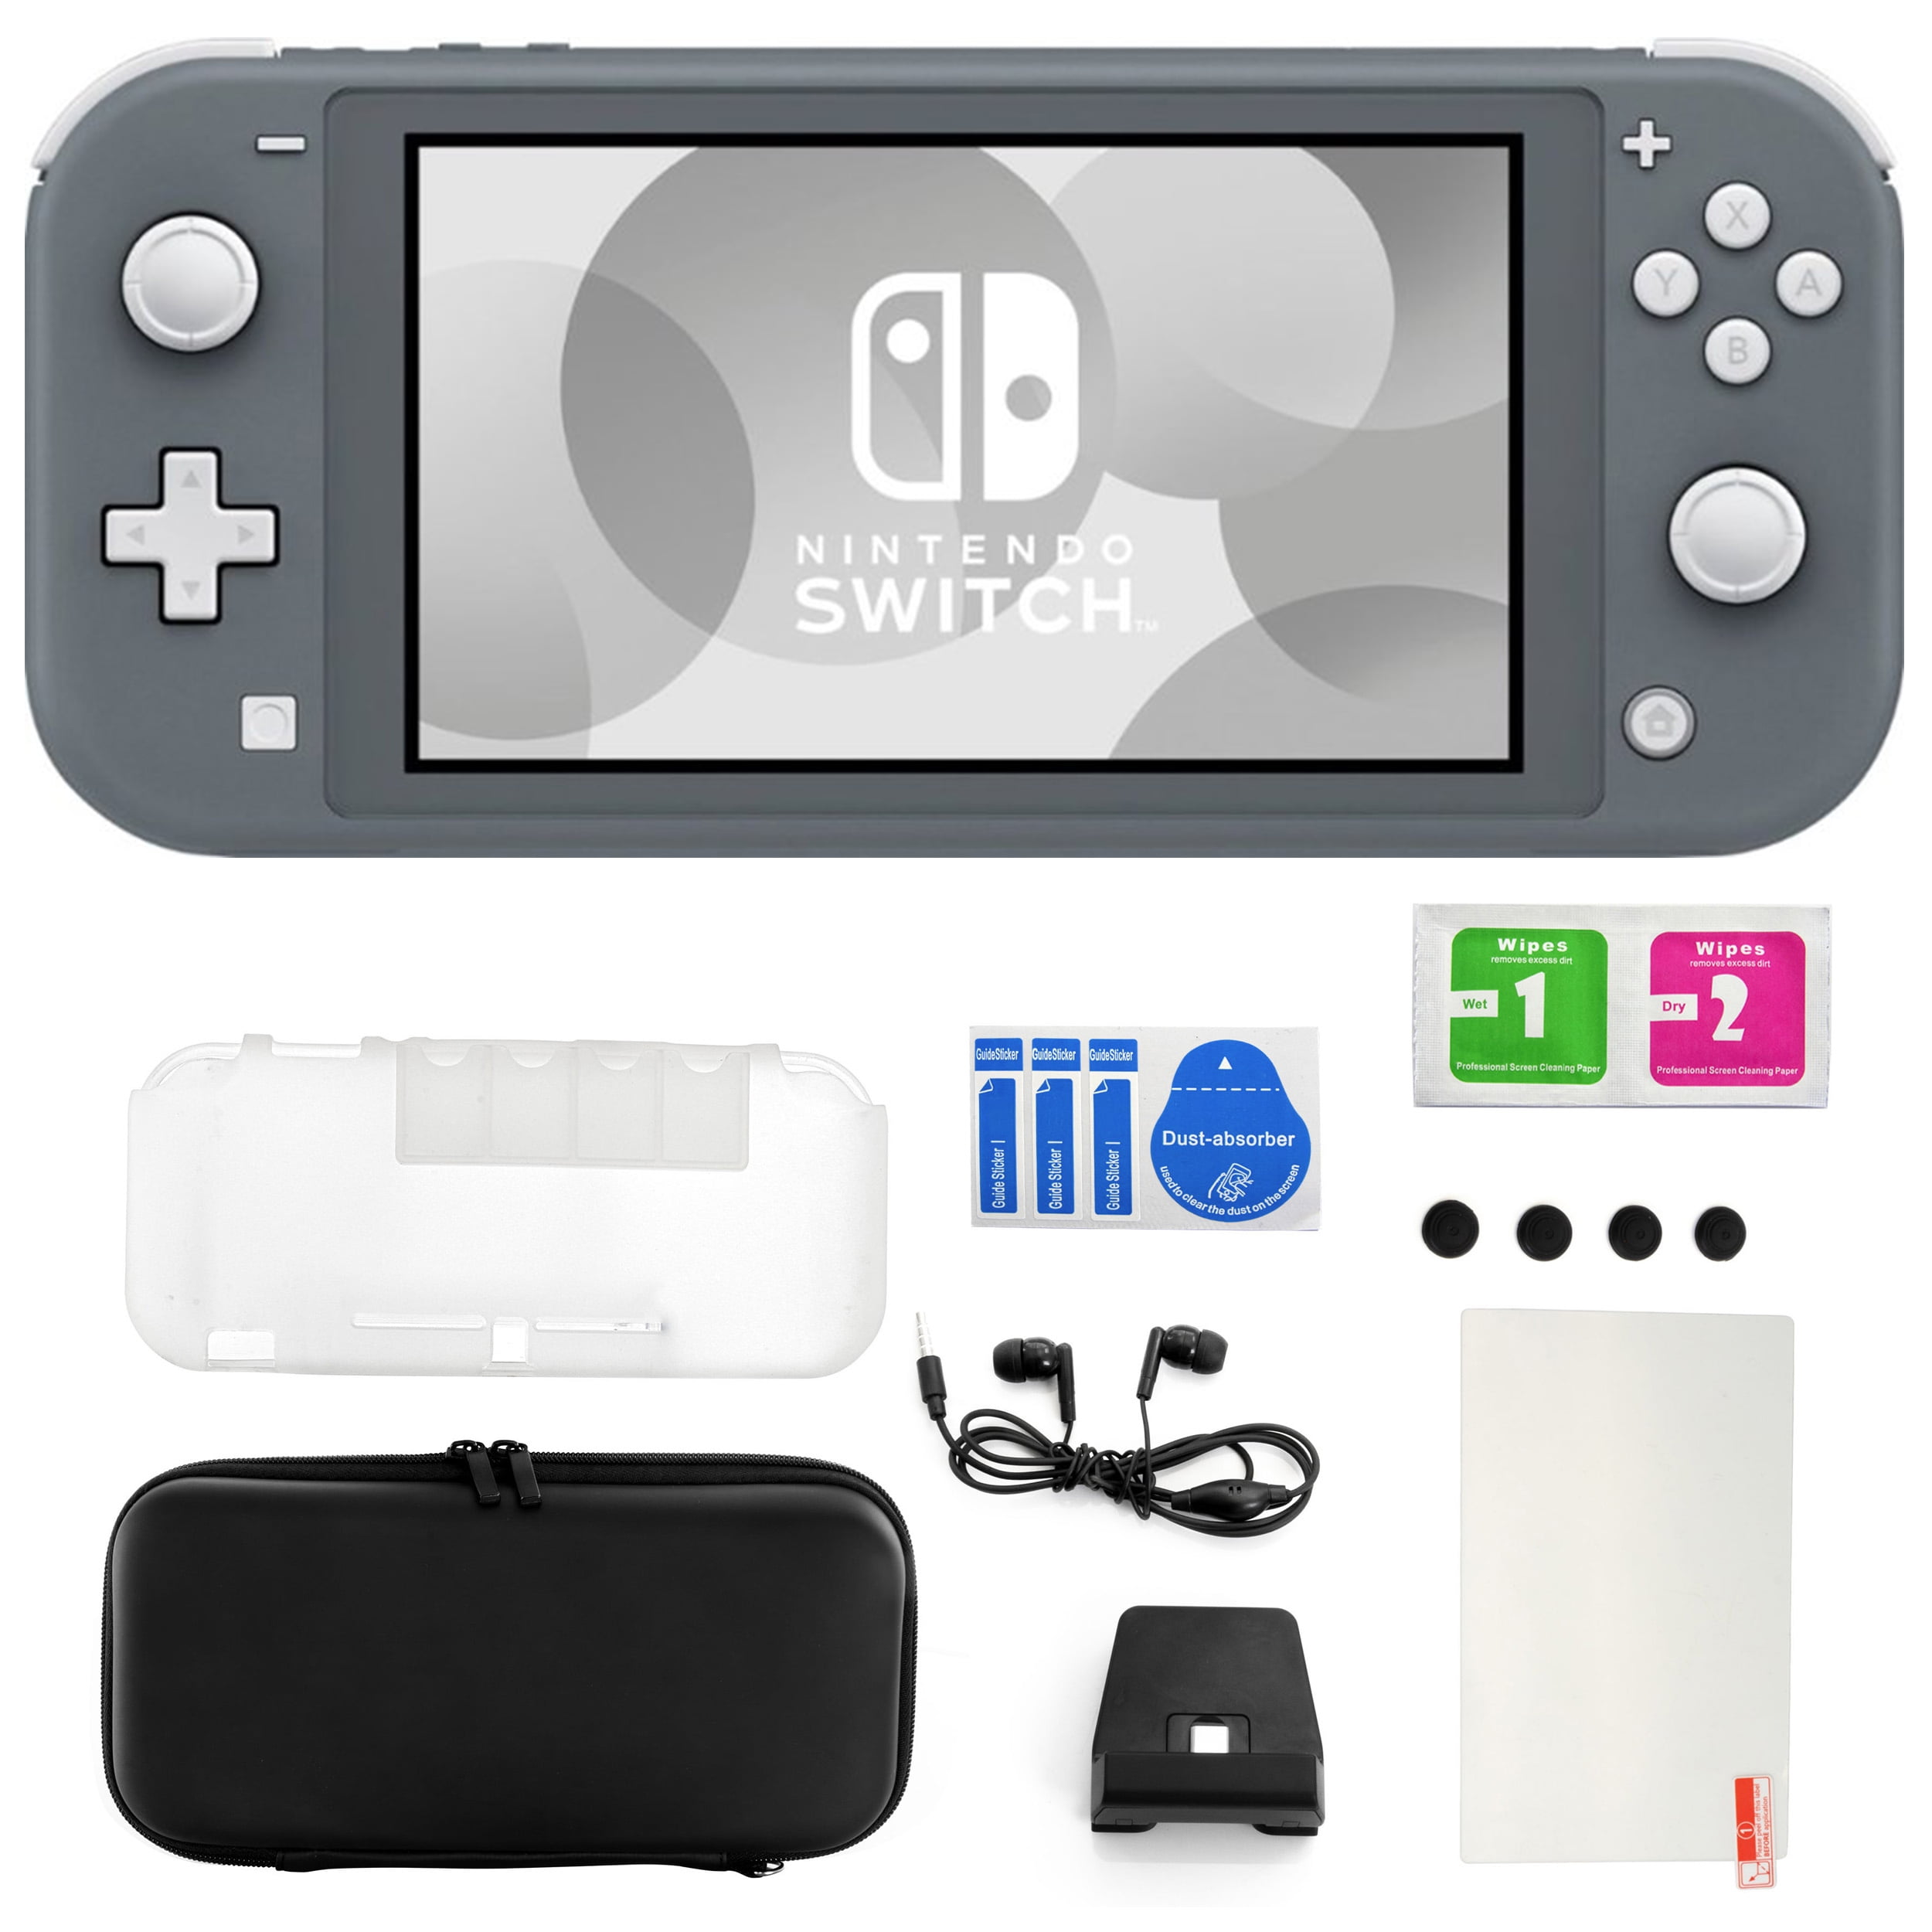 Nintendo Switch Lite in Gray with 11 in 1 Accessories Kit - Walmart.com